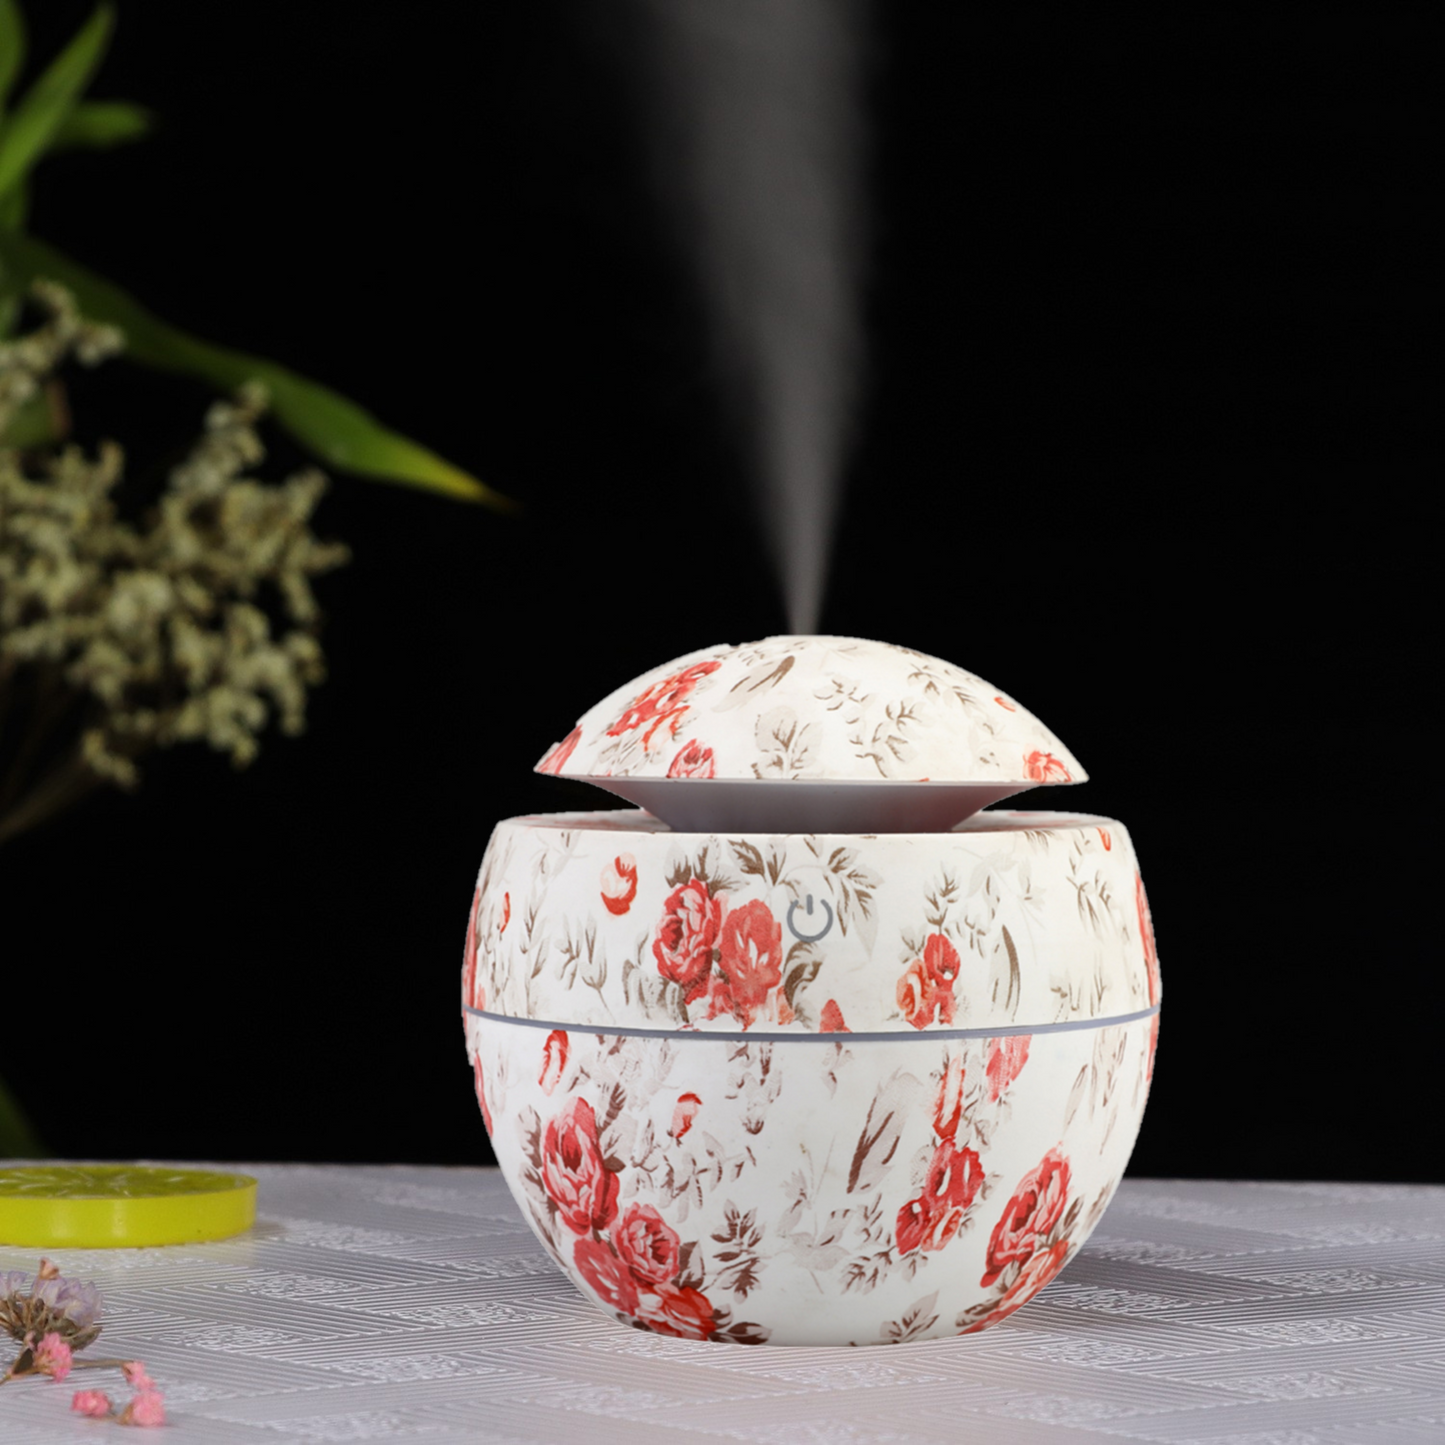      MOLOO-Aroma-Difusser-Rood-Luchtbevochtiger-luchtverfrisser-Aroma-therapie-LED-USB